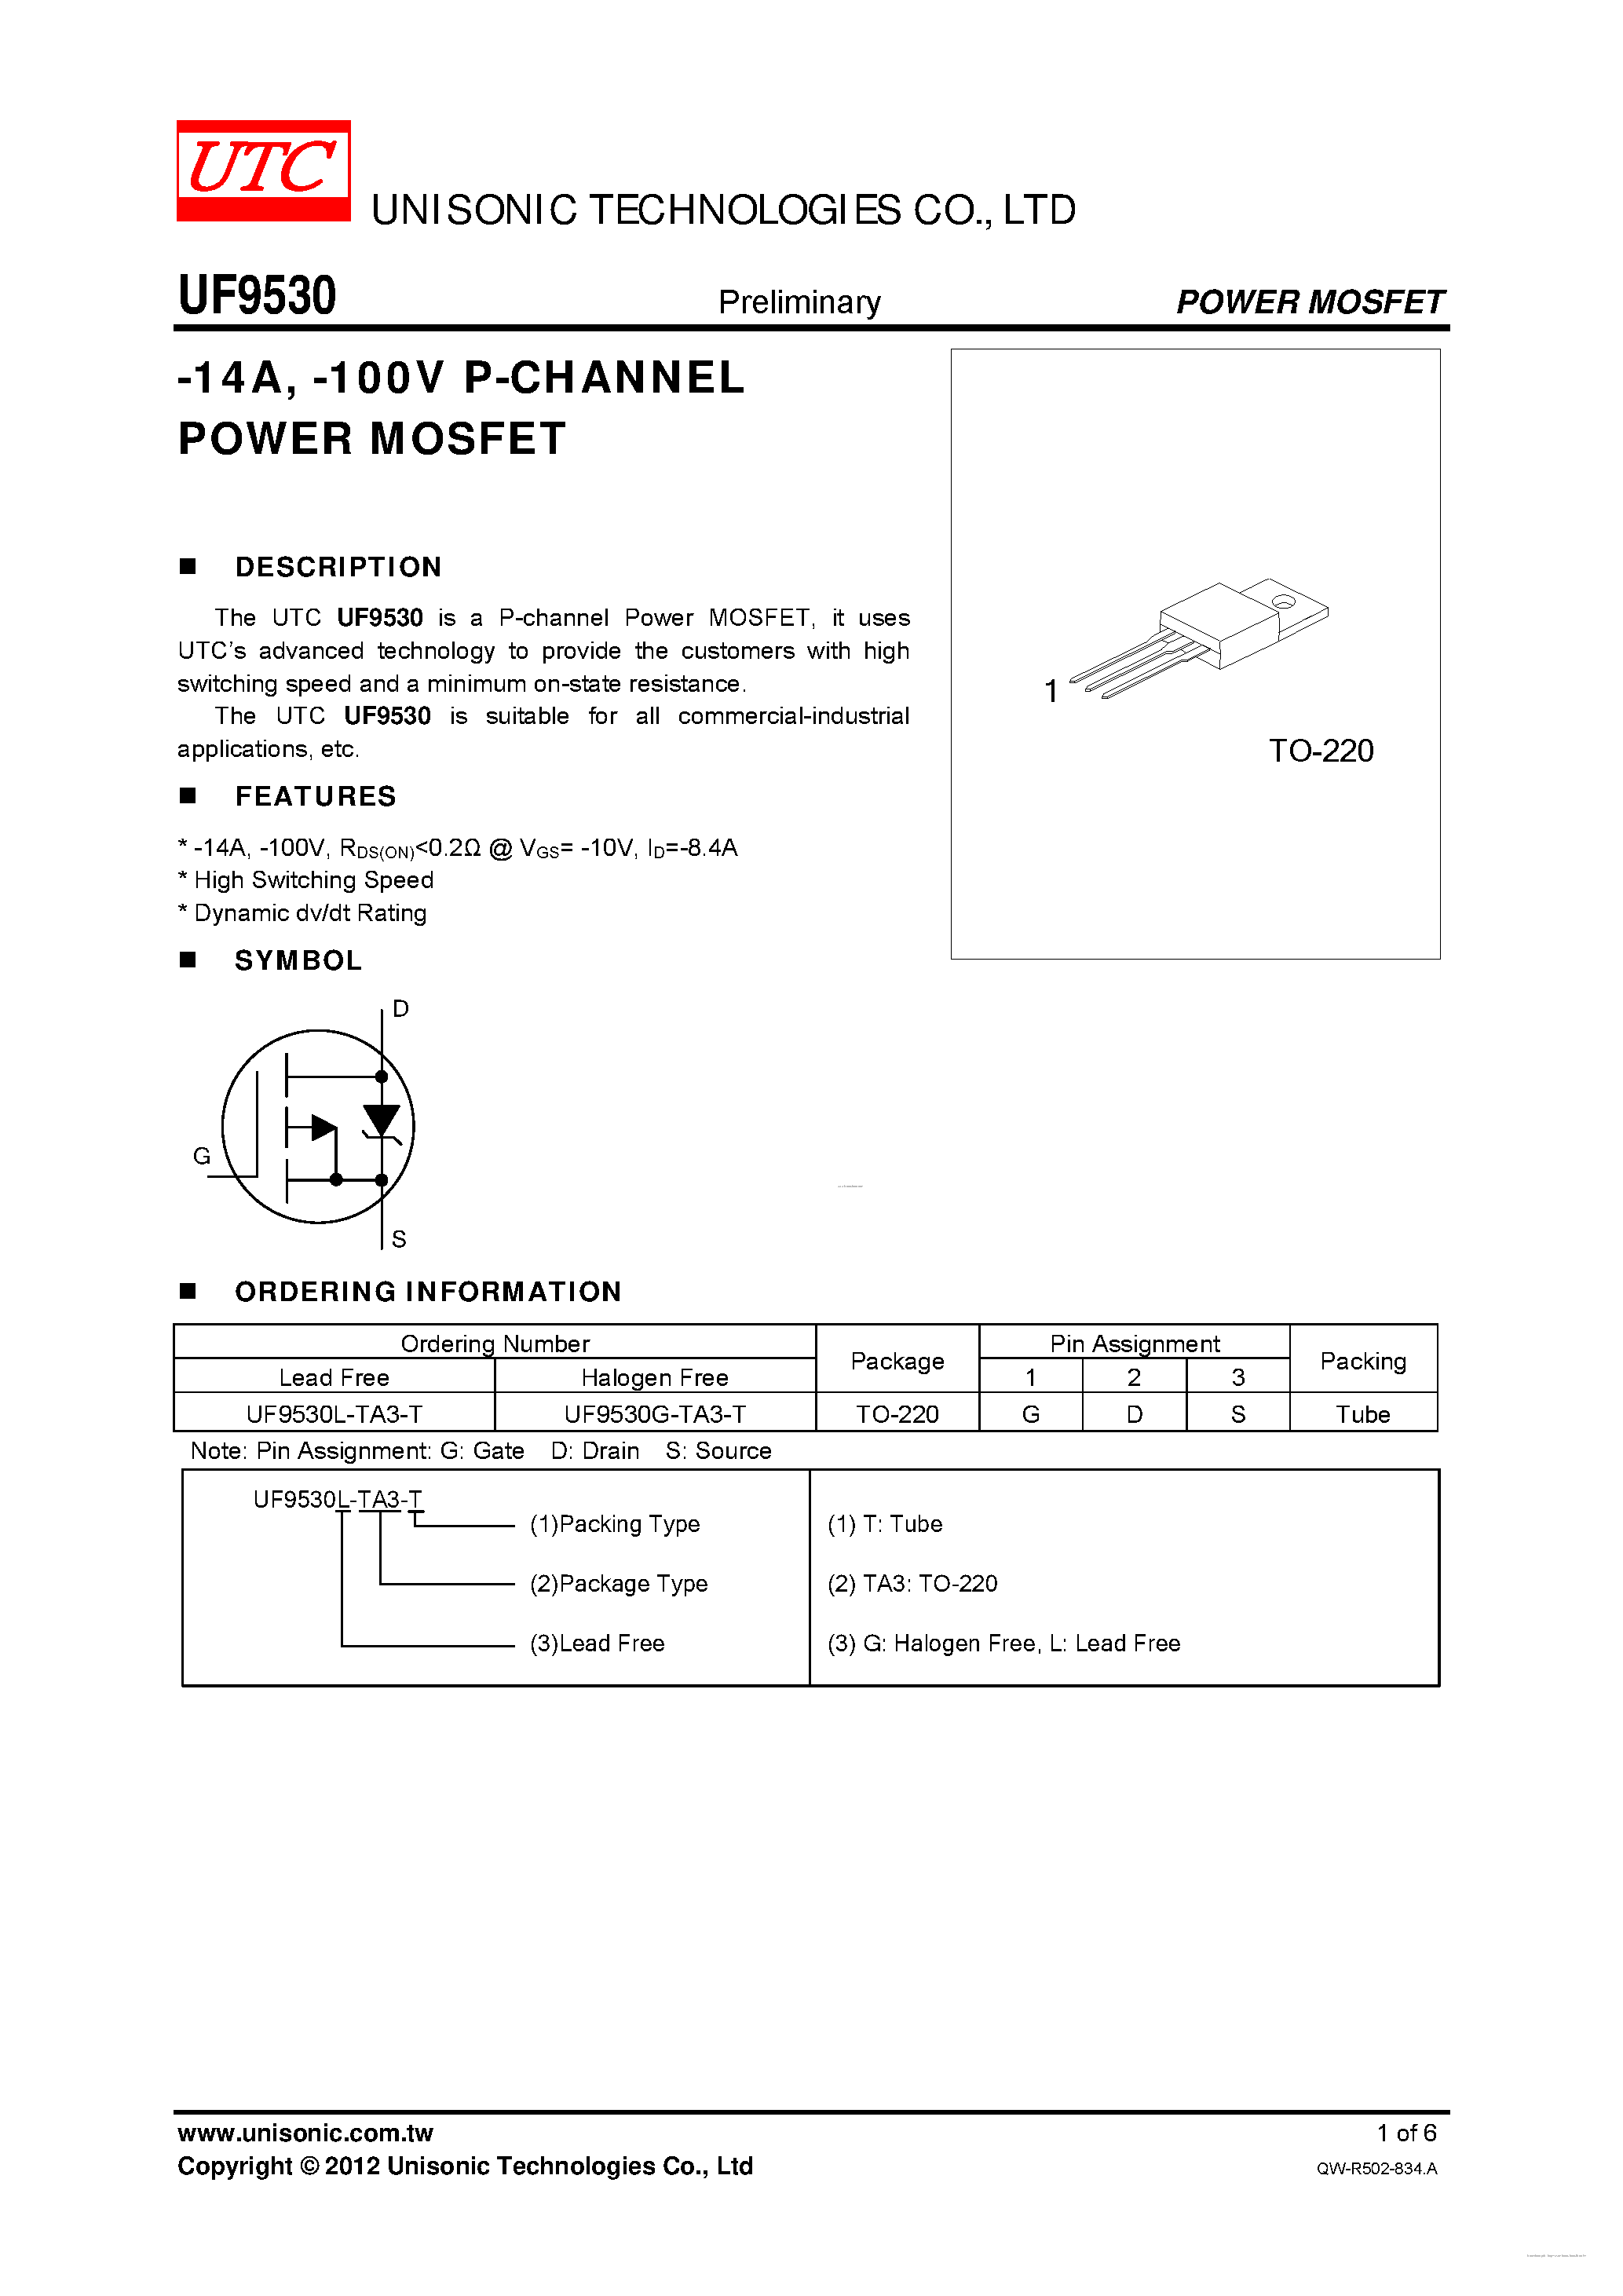 Datasheet UF9530 - P-CHANNEL POWER MOSFET page 1